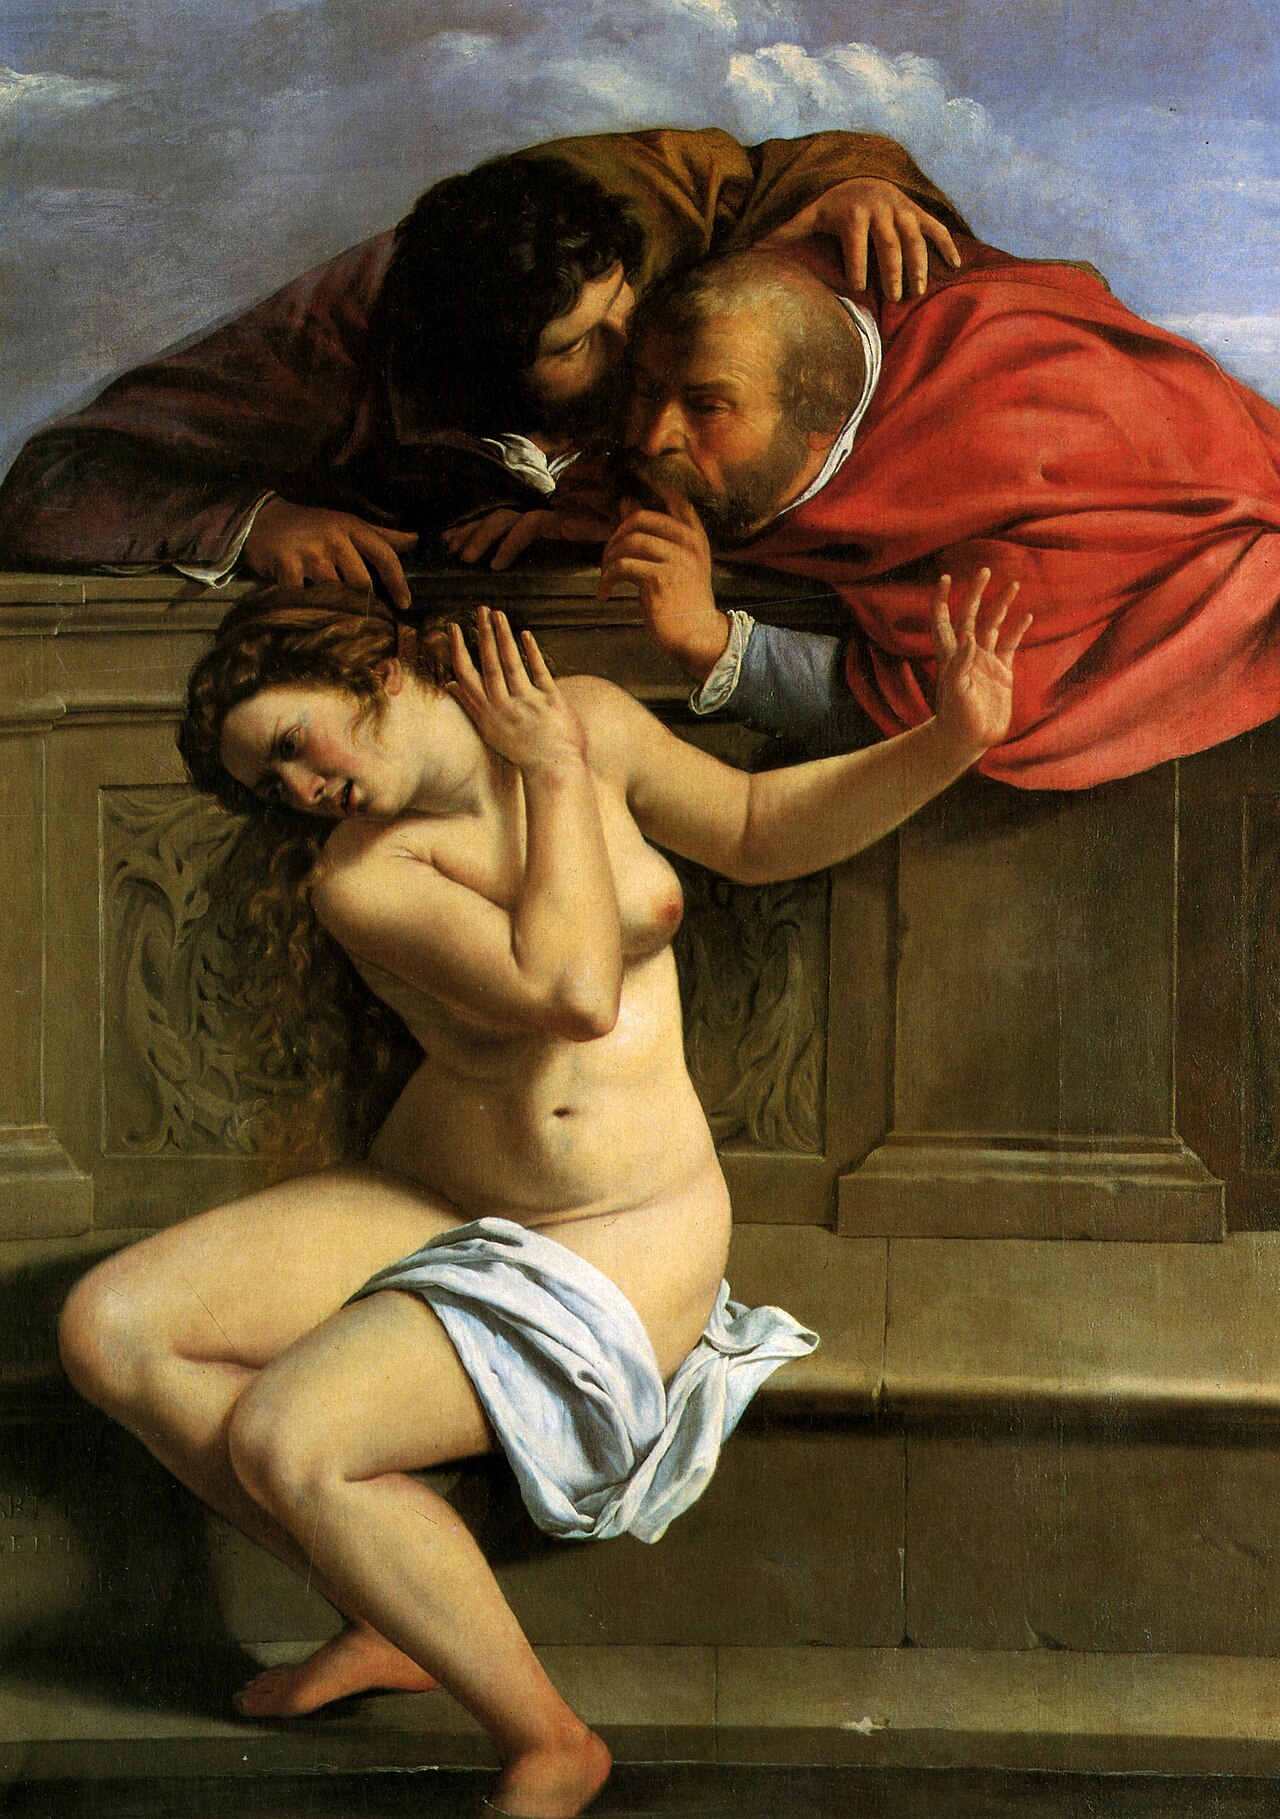 A nude woman sits on a bench, with just a white cloth draped around one thigh. Behind the bench, two men lean over the edge to spy on and harass her. One man whispers into the others ear as though they are conspiring. The young woman recoils, her body twisted in distress with both of her hands up as though she is trying to get away from them. 